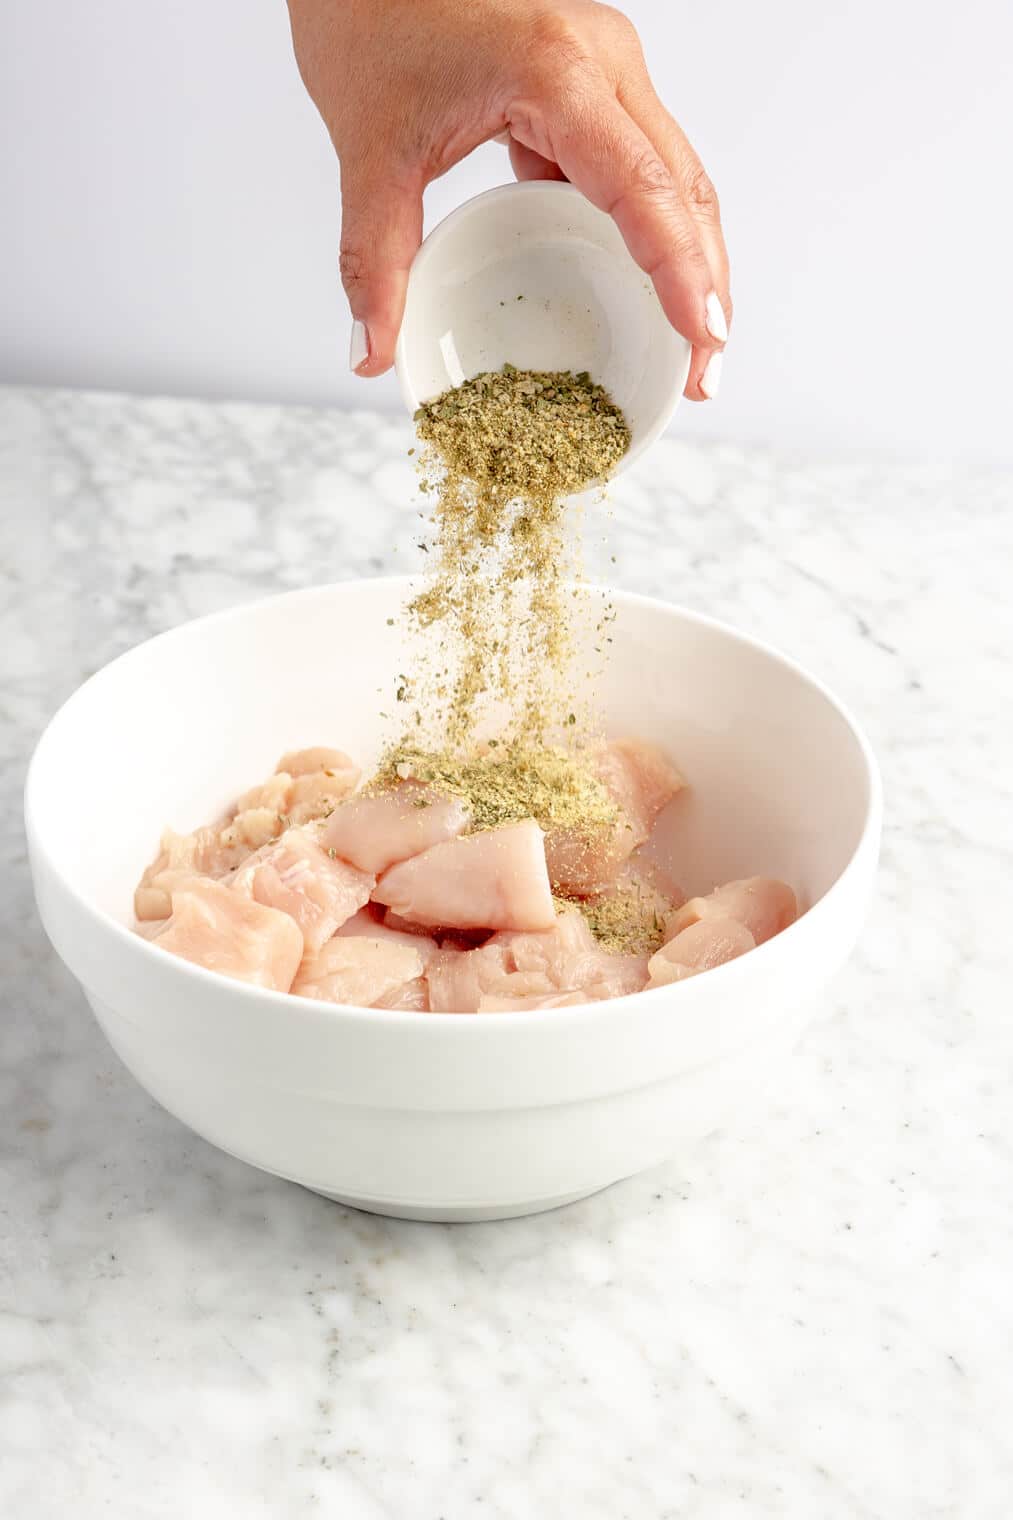 Hand holding small, white bowl with seasoning sprinkling over a white bowl with cubed chicken breast.